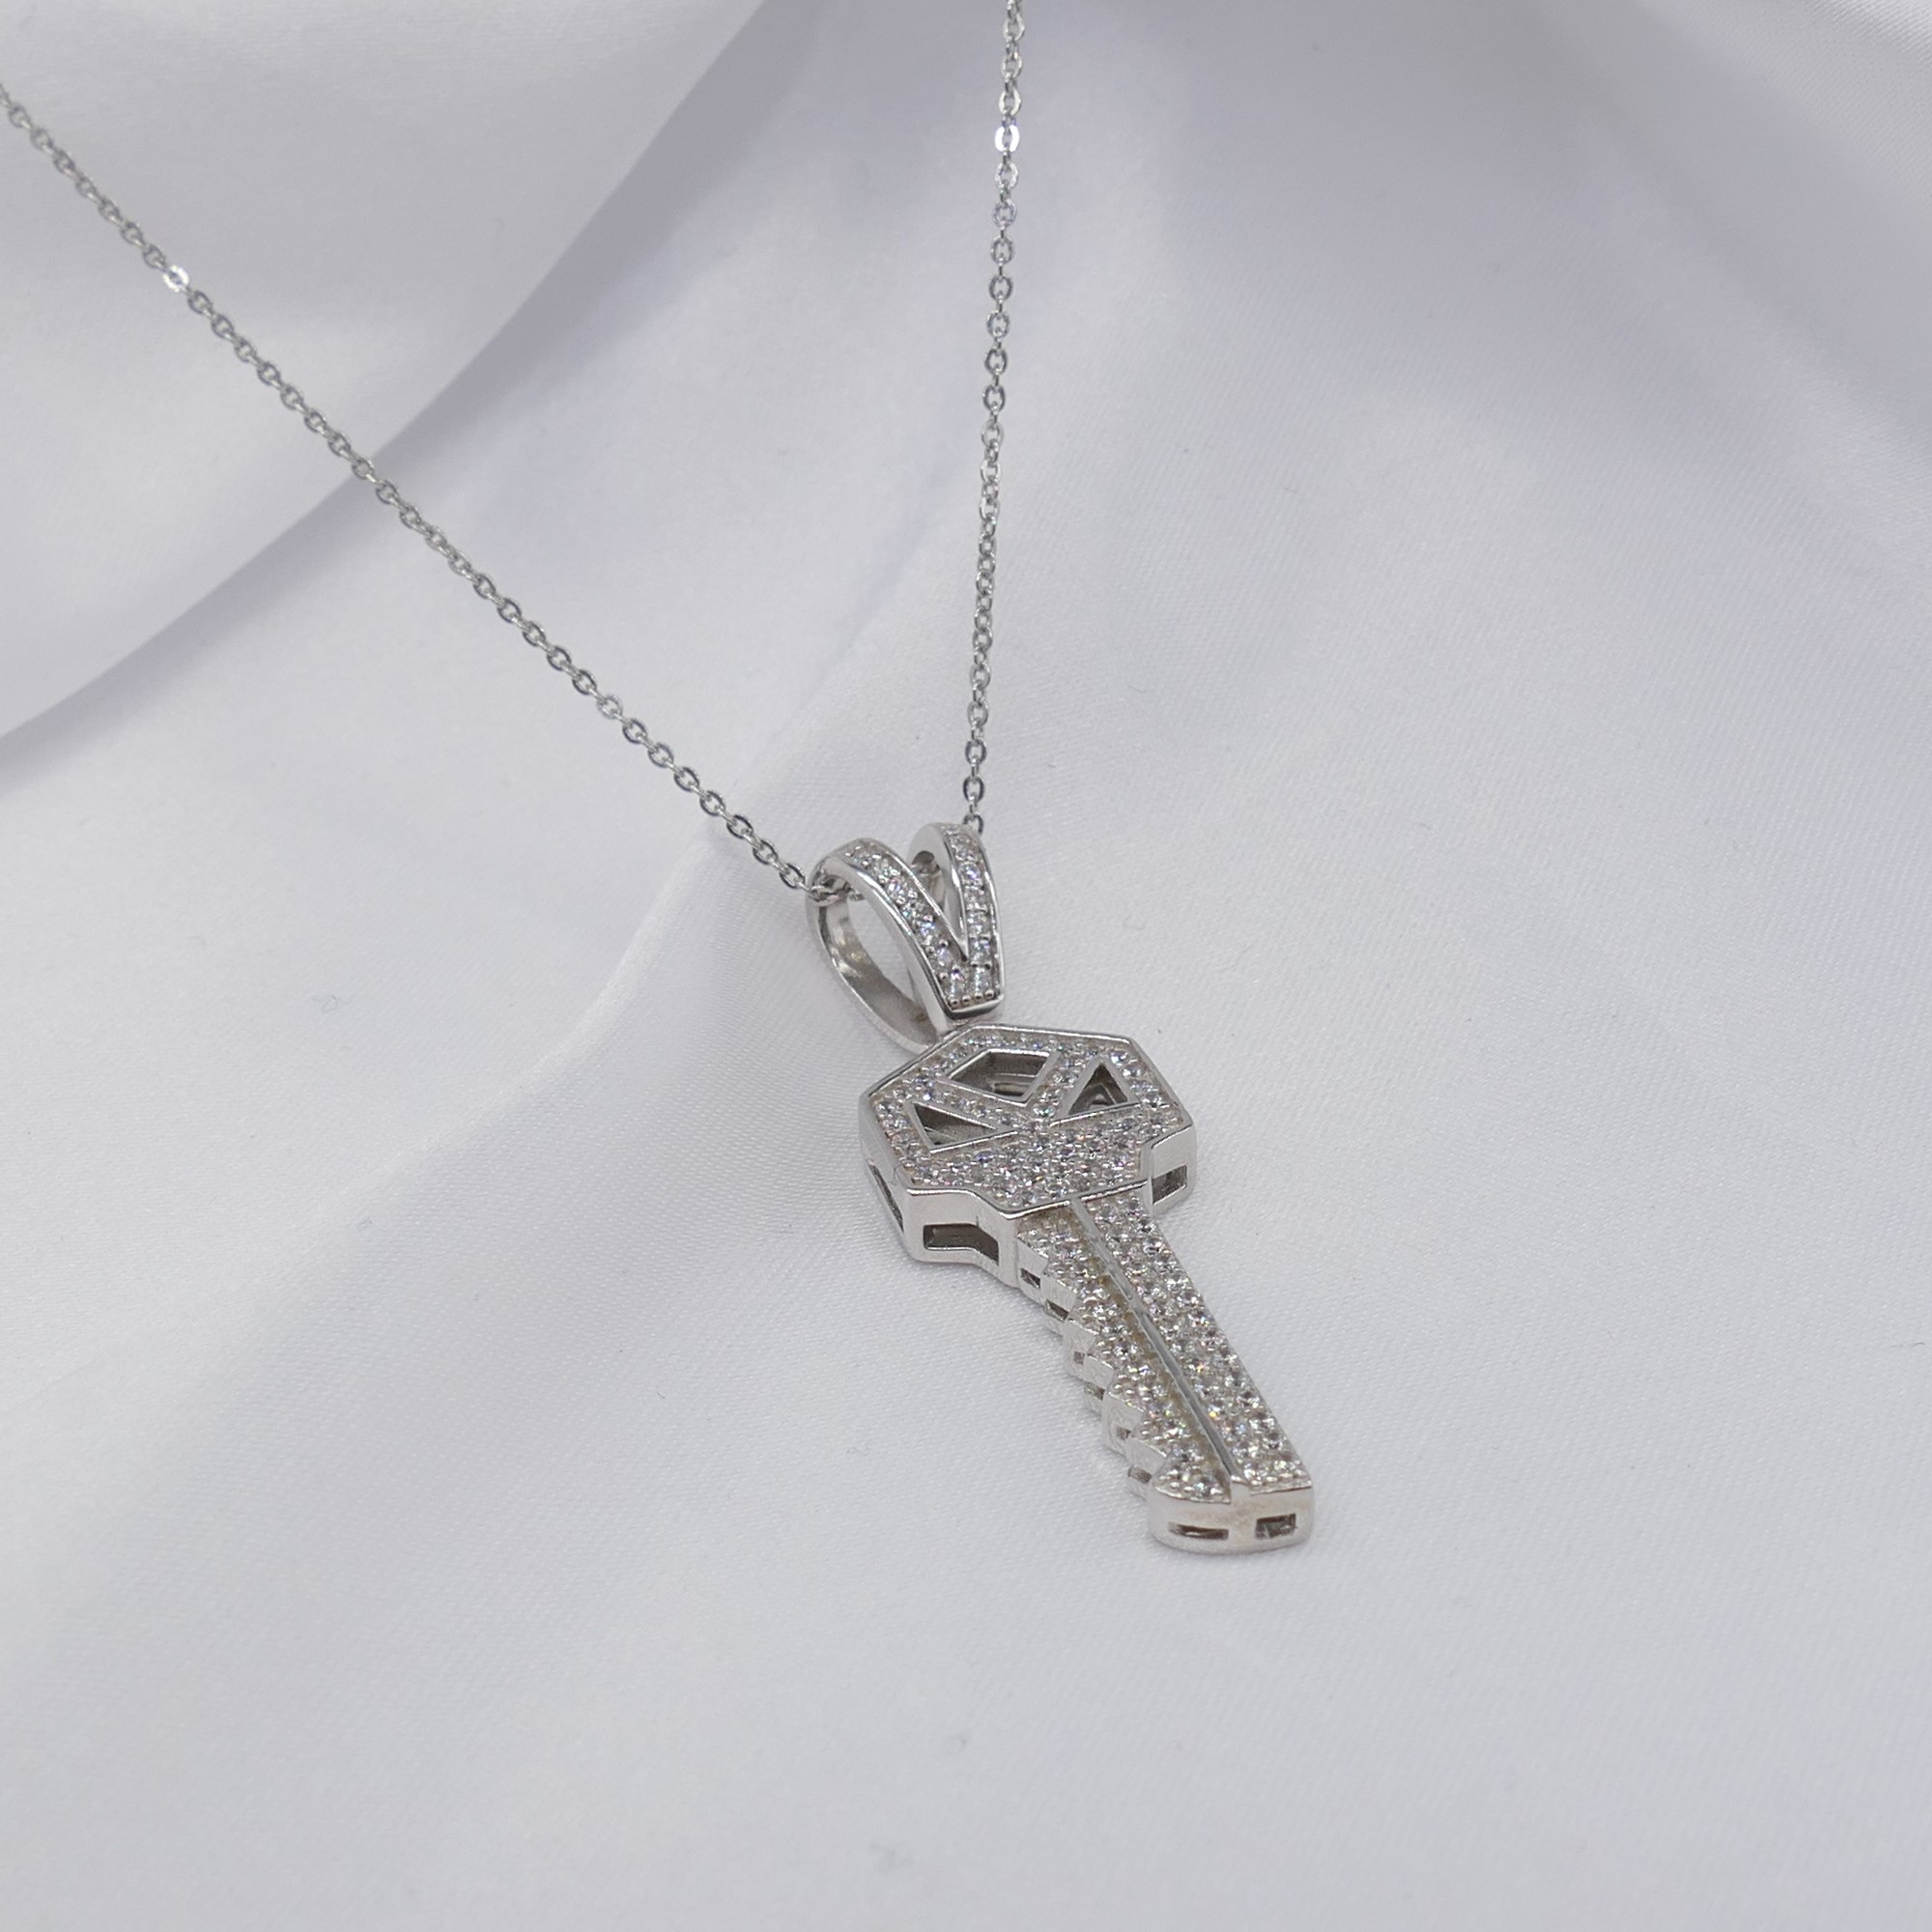 Gem-Set Key Pendant and Chain In Sterling Silver - Image 3 of 6